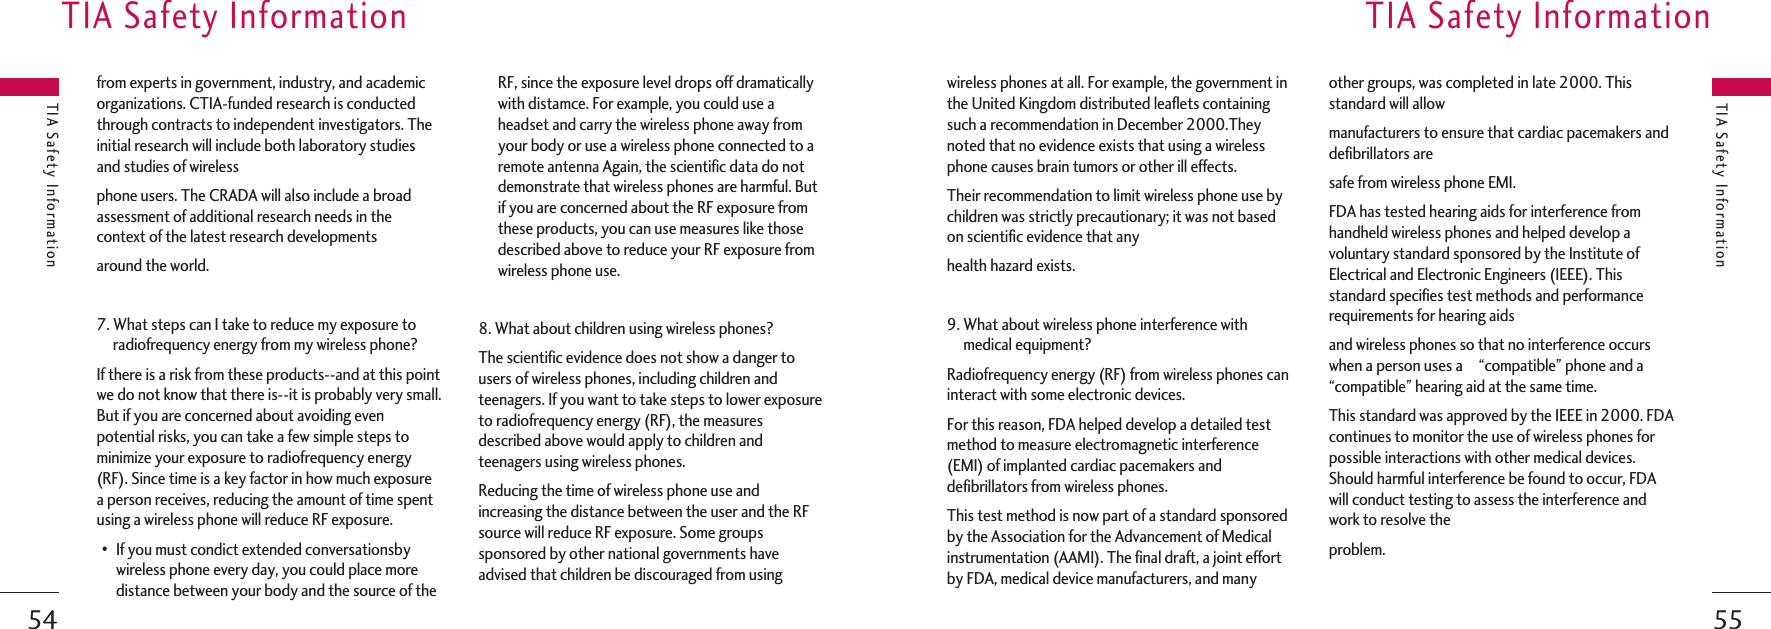 wireless phones at all. For example, the government inthe United Kingdom distributed leaflets containingsuch a recommendation in December 2000.Theynoted that no evidence exists that using a wirelessphone causes brain tumors or other ill effects.Their recommendation to limit wireless phone use bychildren was strictly precautionary; it was not basedon scientific evidence that any health hazard exists.9. What about wireless phone interference withmedical equipment? Radiofrequency energy (RF) from wireless phones caninteract with some electronic devices.For this reason, FDA helped develop a detailed testmethod to measure electromagnetic interference(EMI) of implanted cardiac pacemakers anddefibrillators from wireless phones.This test method is now part of a standard sponsoredby the Association for the Advancement of Medicalinstrumentation (AAMI). The final draft, a joint effortby FDA, medical device manufacturers, and manyother groups, was completed in late 2000. Thisstandard will allow manufacturers to ensure that cardiac pacemakers anddefibrillators are safe from wireless phone EMI.FDA has tested hearing aids for interference fromhandheld wireless phones and helped develop avoluntary standard sponsored by the Institute ofElectrical and Electronic Engineers (IEEE). Thisstandard specifies test methods and performancerequirements for hearing aidsand wireless phones so that no interference occurswhen a person uses a  “compatible” phone and a“compatible” hearing aid at the same time.This standard was approved by the IEEE in 2000. FDAcontinues to monitor the use of wireless phones forpossible interactions with other medical devices.Should harmful interference be found to occur, FDAwill conduct testing to assess the interference andwork to resolve theproblem. TIA Safety Information55from experts in government, industry, and academicorganizations. CTIA-funded research is conductedthrough contracts to independent investigators. Theinitial research will include both laboratory studiesand studies of wirelessphone users. The CRADA will also include a broadassessment of additional research needs in thecontext of the latest research developments around the world.7. What steps can I take to reduce my exposure toradiofrequency energy from my wireless phone?If there is a risk from these products--and at this pointwe do not know that there is--it is probably very small.But if you are concerned about avoiding evenpotential risks, you can take a few simple steps tominimize your exposure to radiofrequency energy(RF). Since time is a key factor in how much exposurea person receives, reducing the amount of time spentusing a wireless phone will reduce RF exposure.•If you must condict extended conversationsbywireless phone every day, you could place moredistance between your body and the source of theRF, since the exposure level drops off dramaticallywith distamce. For example, you could use aheadset and carry the wireless phone away fromyour body or use a wireless phone connected to aremote antenna Again, the scientific data do notdemonstrate that wireless phones are harmful. Butif you are concerned about the RF exposure fromthese products, you can use measures like thosedescribed above to reduce your RF exposure fromwireless phone use.8. What about children using wireless phones?The scientific evidence does not show a danger tousers of wireless phones, including children andteenagers. If you want to take steps to lower exposureto radiofrequency energy (RF), the measuresdescribed above would apply to children andteenagers using wireless phones.Reducing the time of wireless phone use andincreasing the distance between the user and the RFsource will reduce RF exposure. Some groupssponsored by other national governments haveadvised that children be discouraged from usingTIA Safety Information54TIA Safety InformationTIA Safety Information